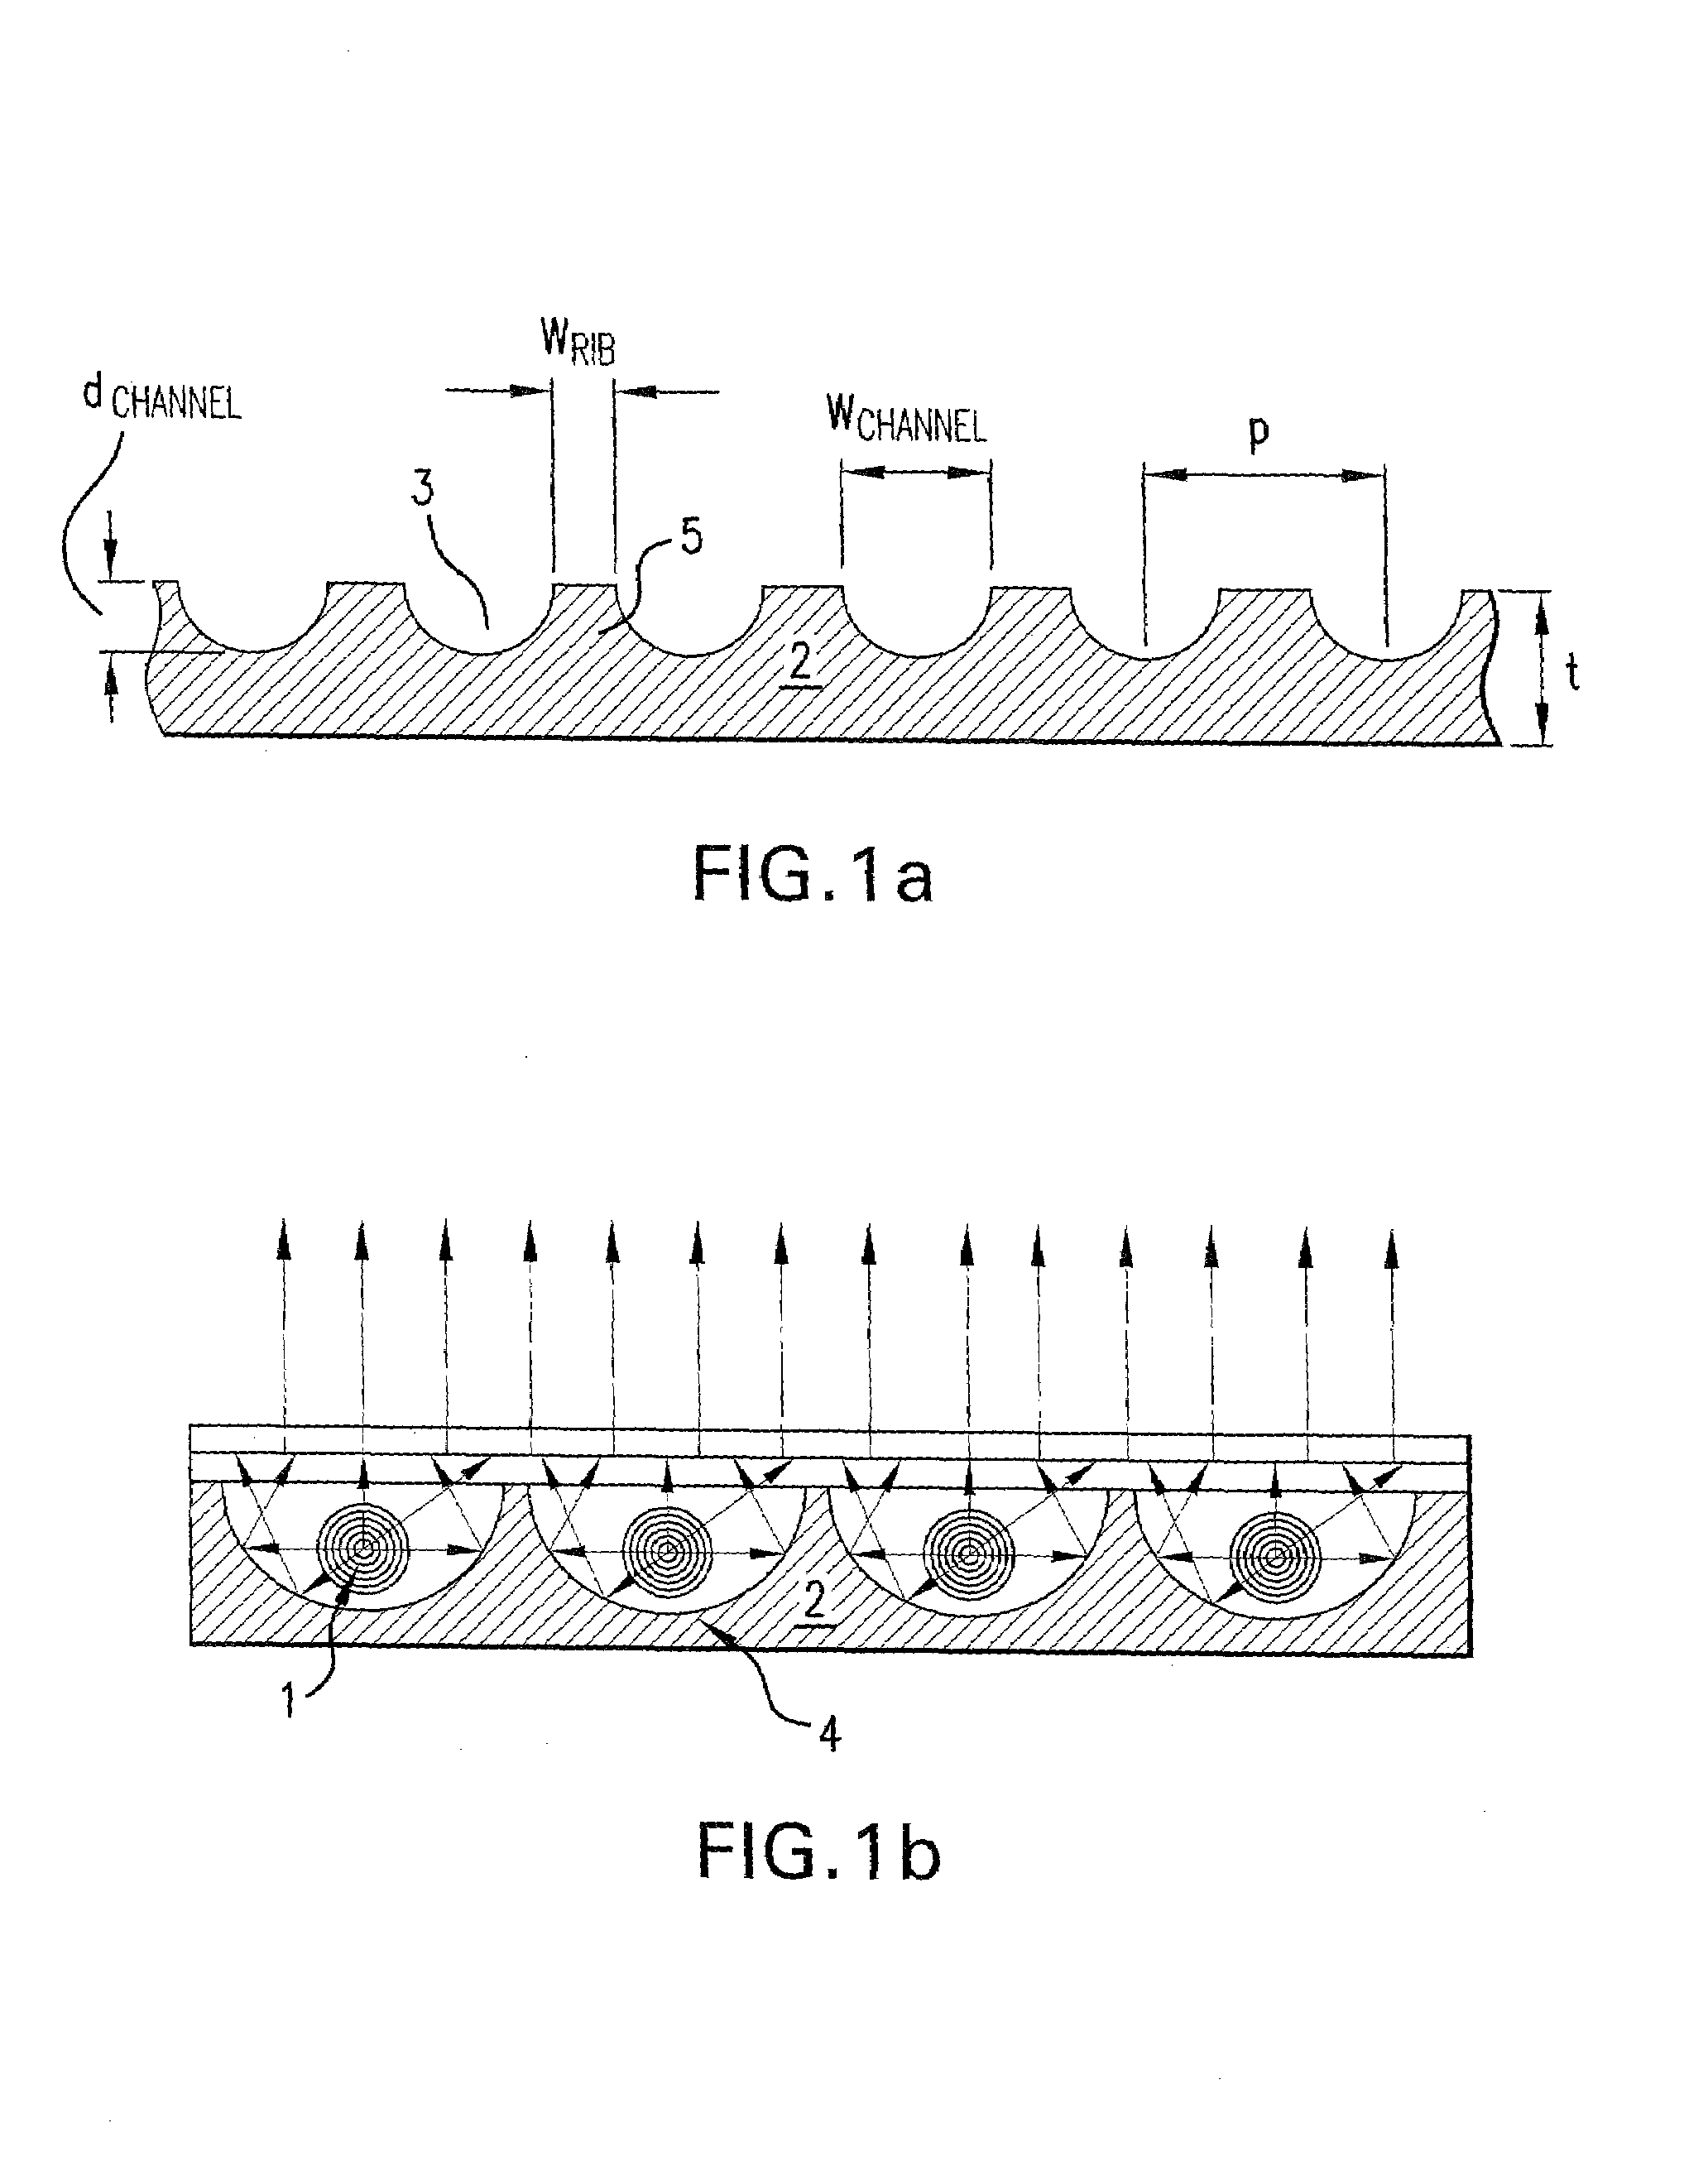 UV-radiation absorbing glass with high chemical resistance, especially for a fluorescent lamp, and methods of making and using same